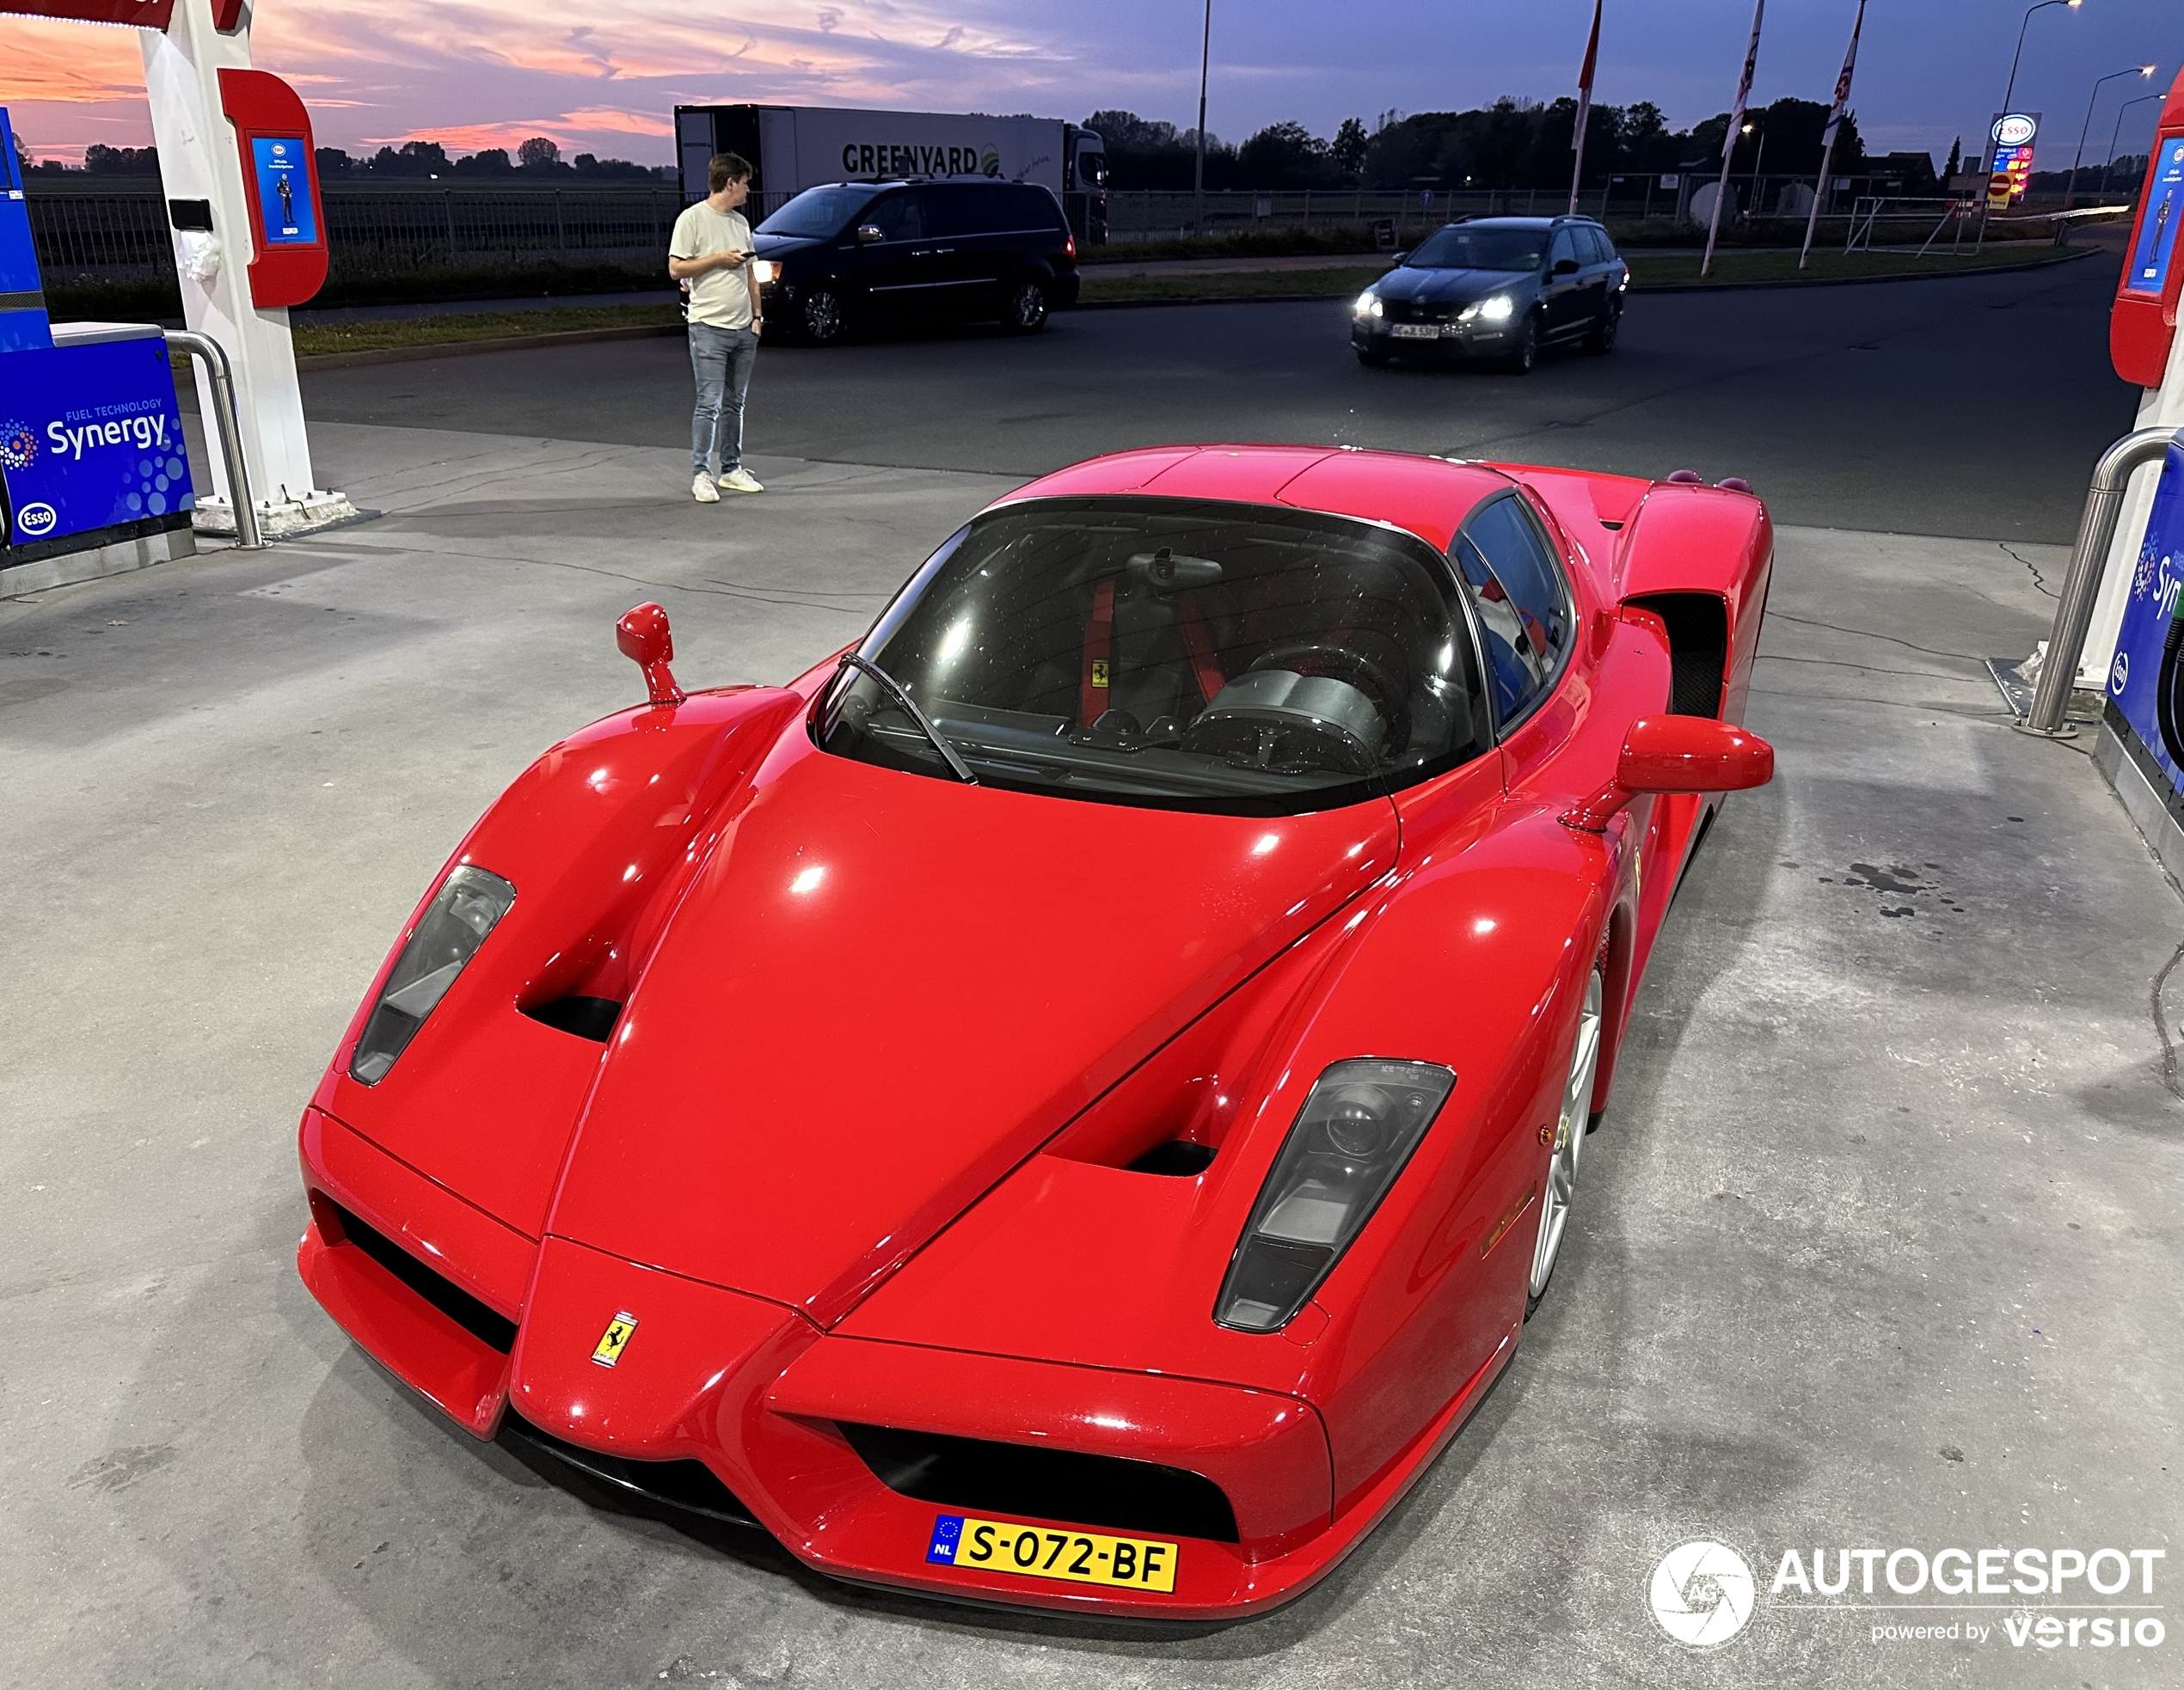 Another Ferrari Enzo Ferrari Spotted in the Netherlands